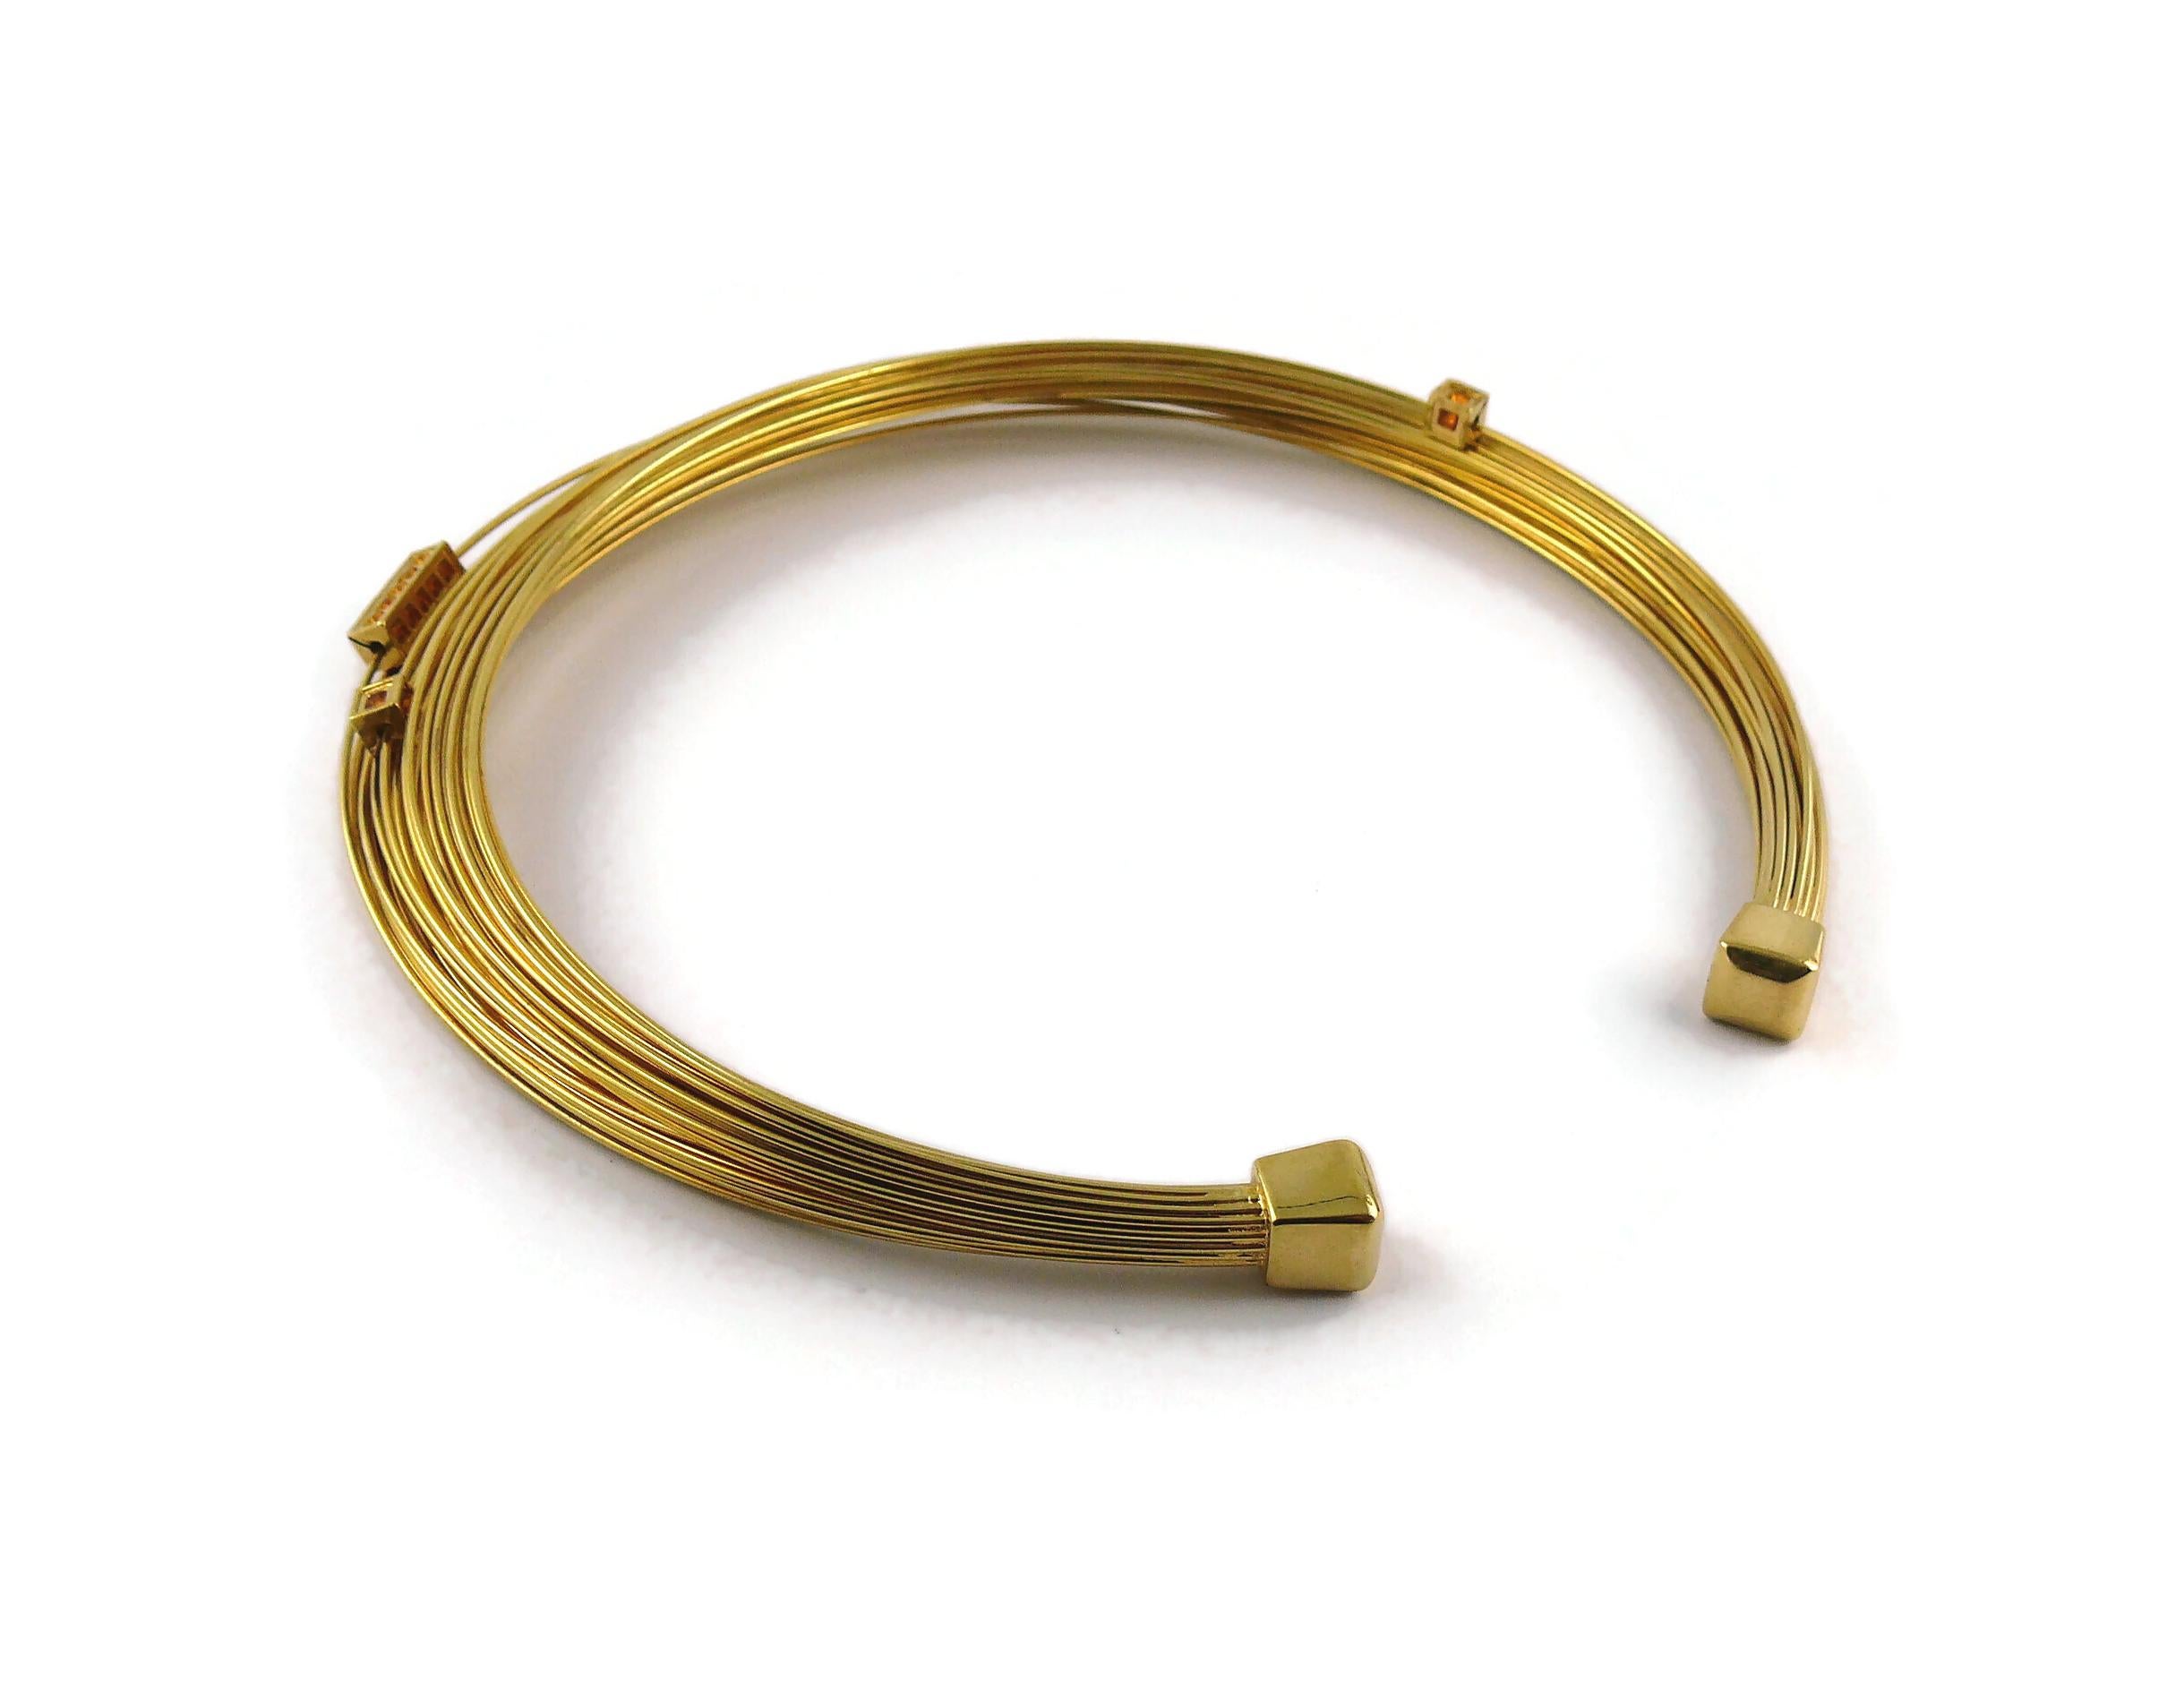 Thierry Mugler Gold Toned Bundled Wires Choker Necklace For Sale 2